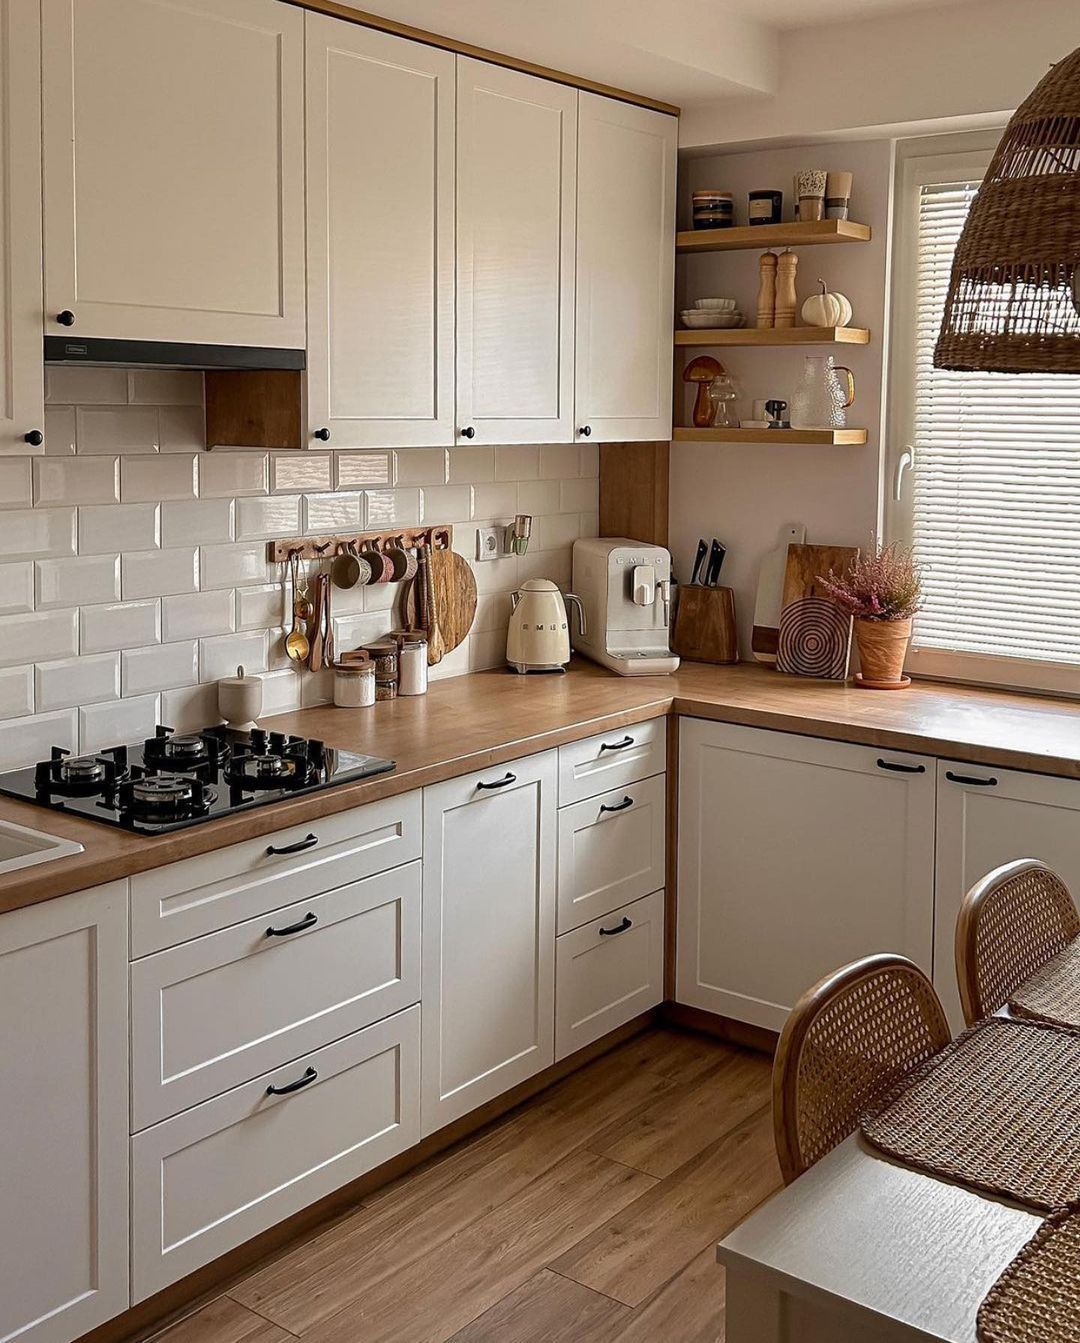 Bringing Life to Your Home: Transforming  Your Kitchen Interior with Style and Functionality